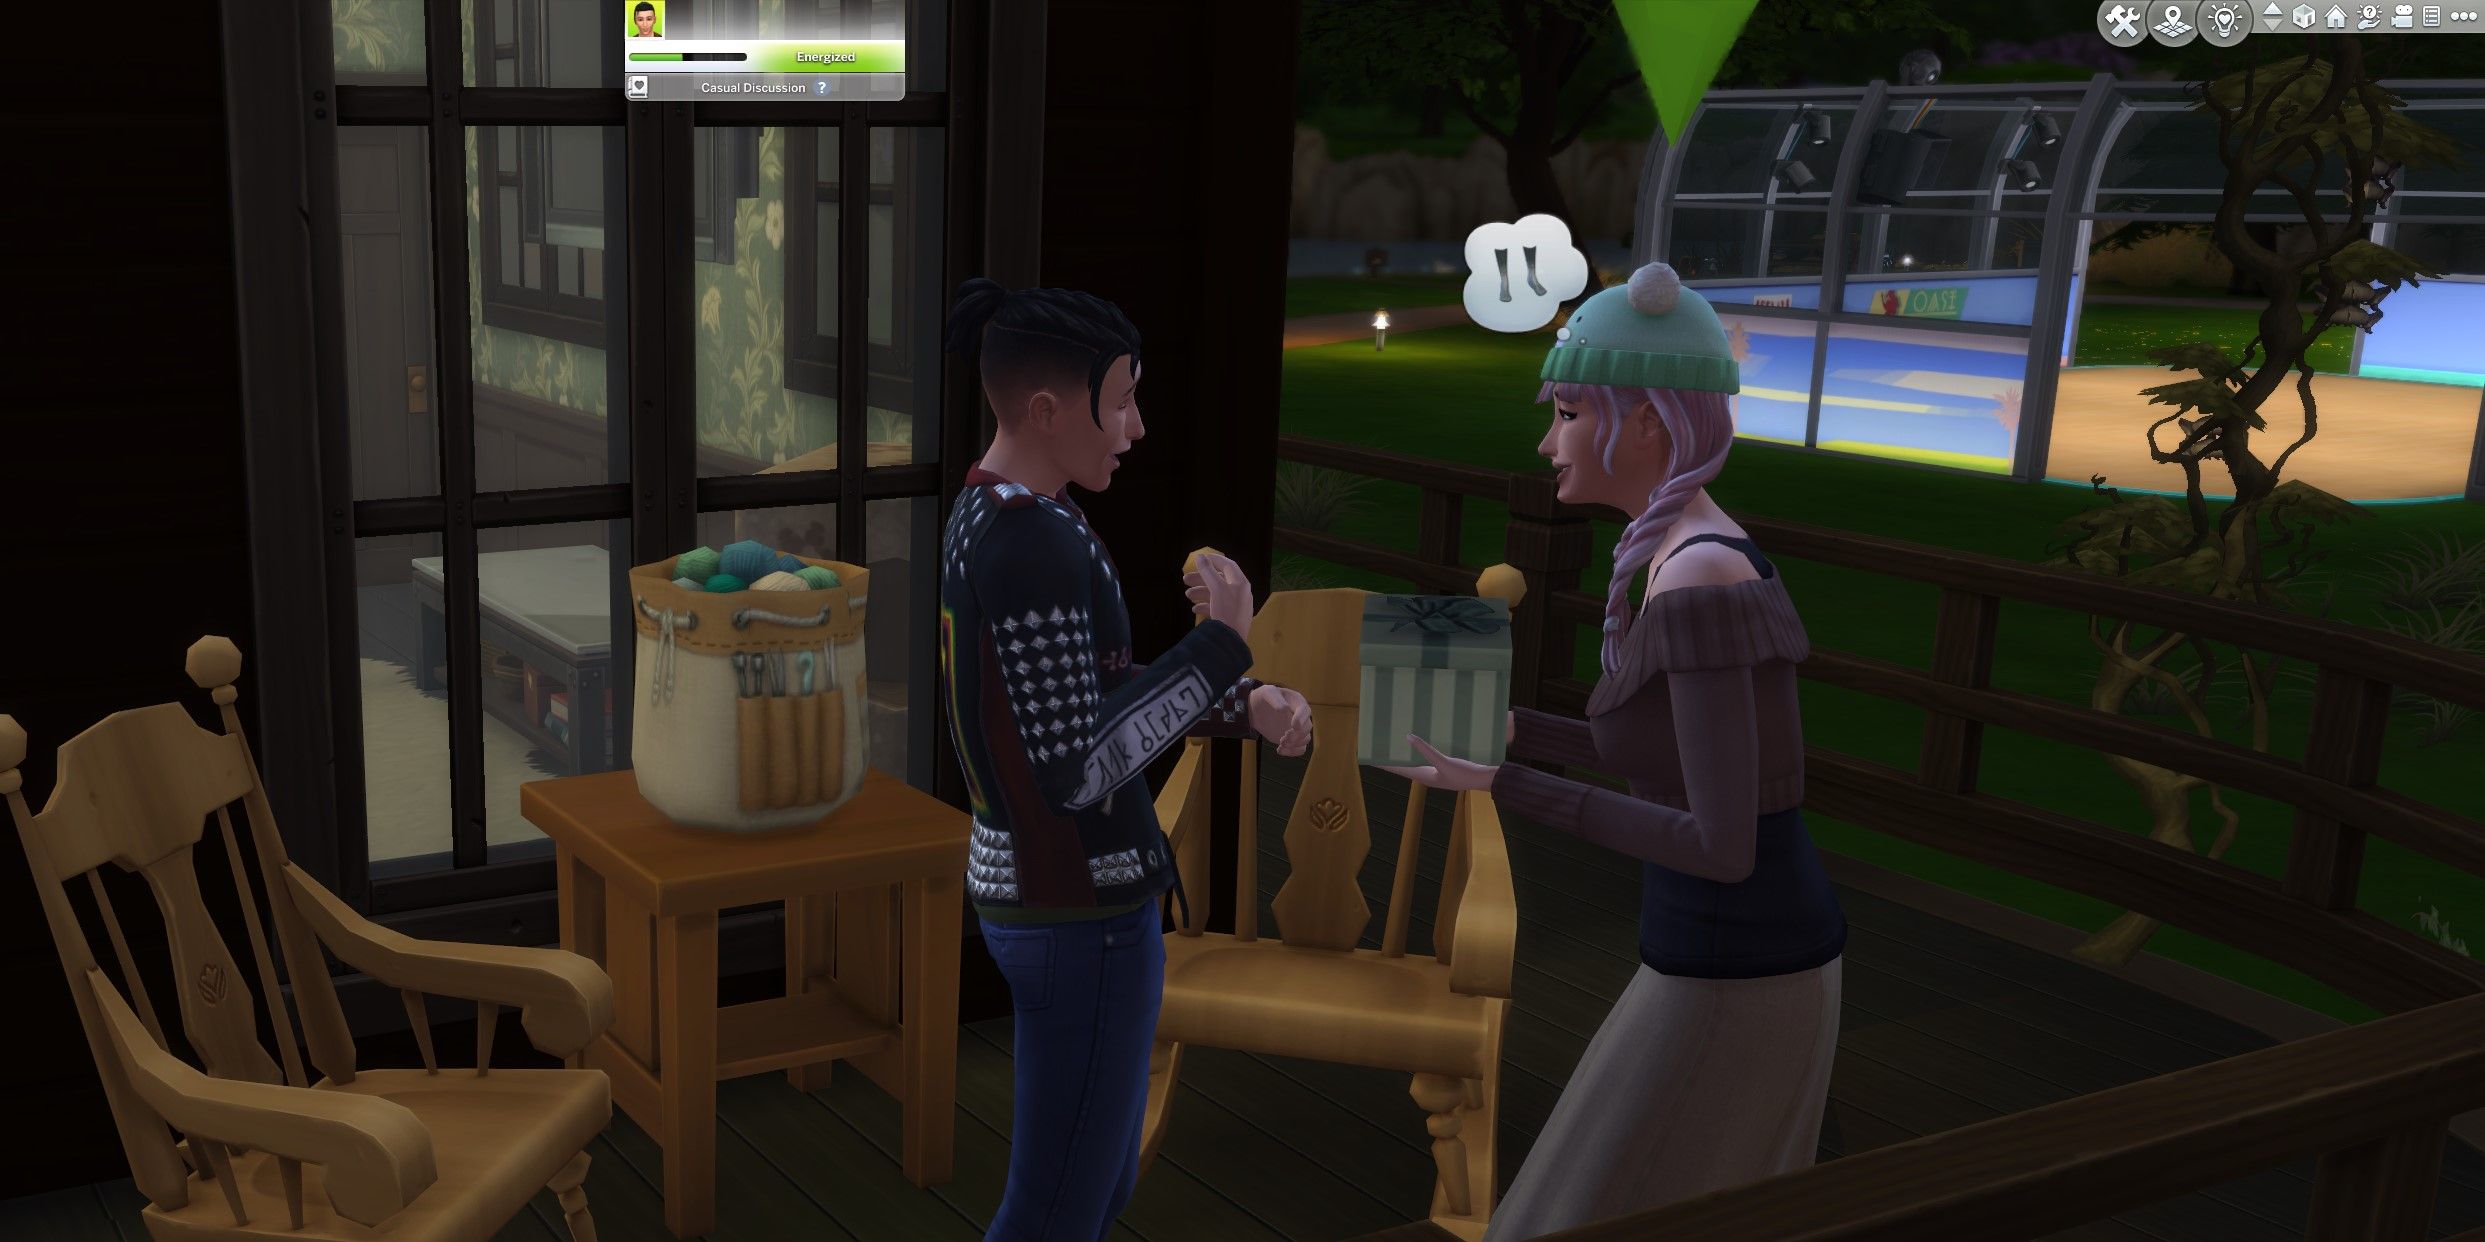 The sims 4: A sim gifting socks to another sim